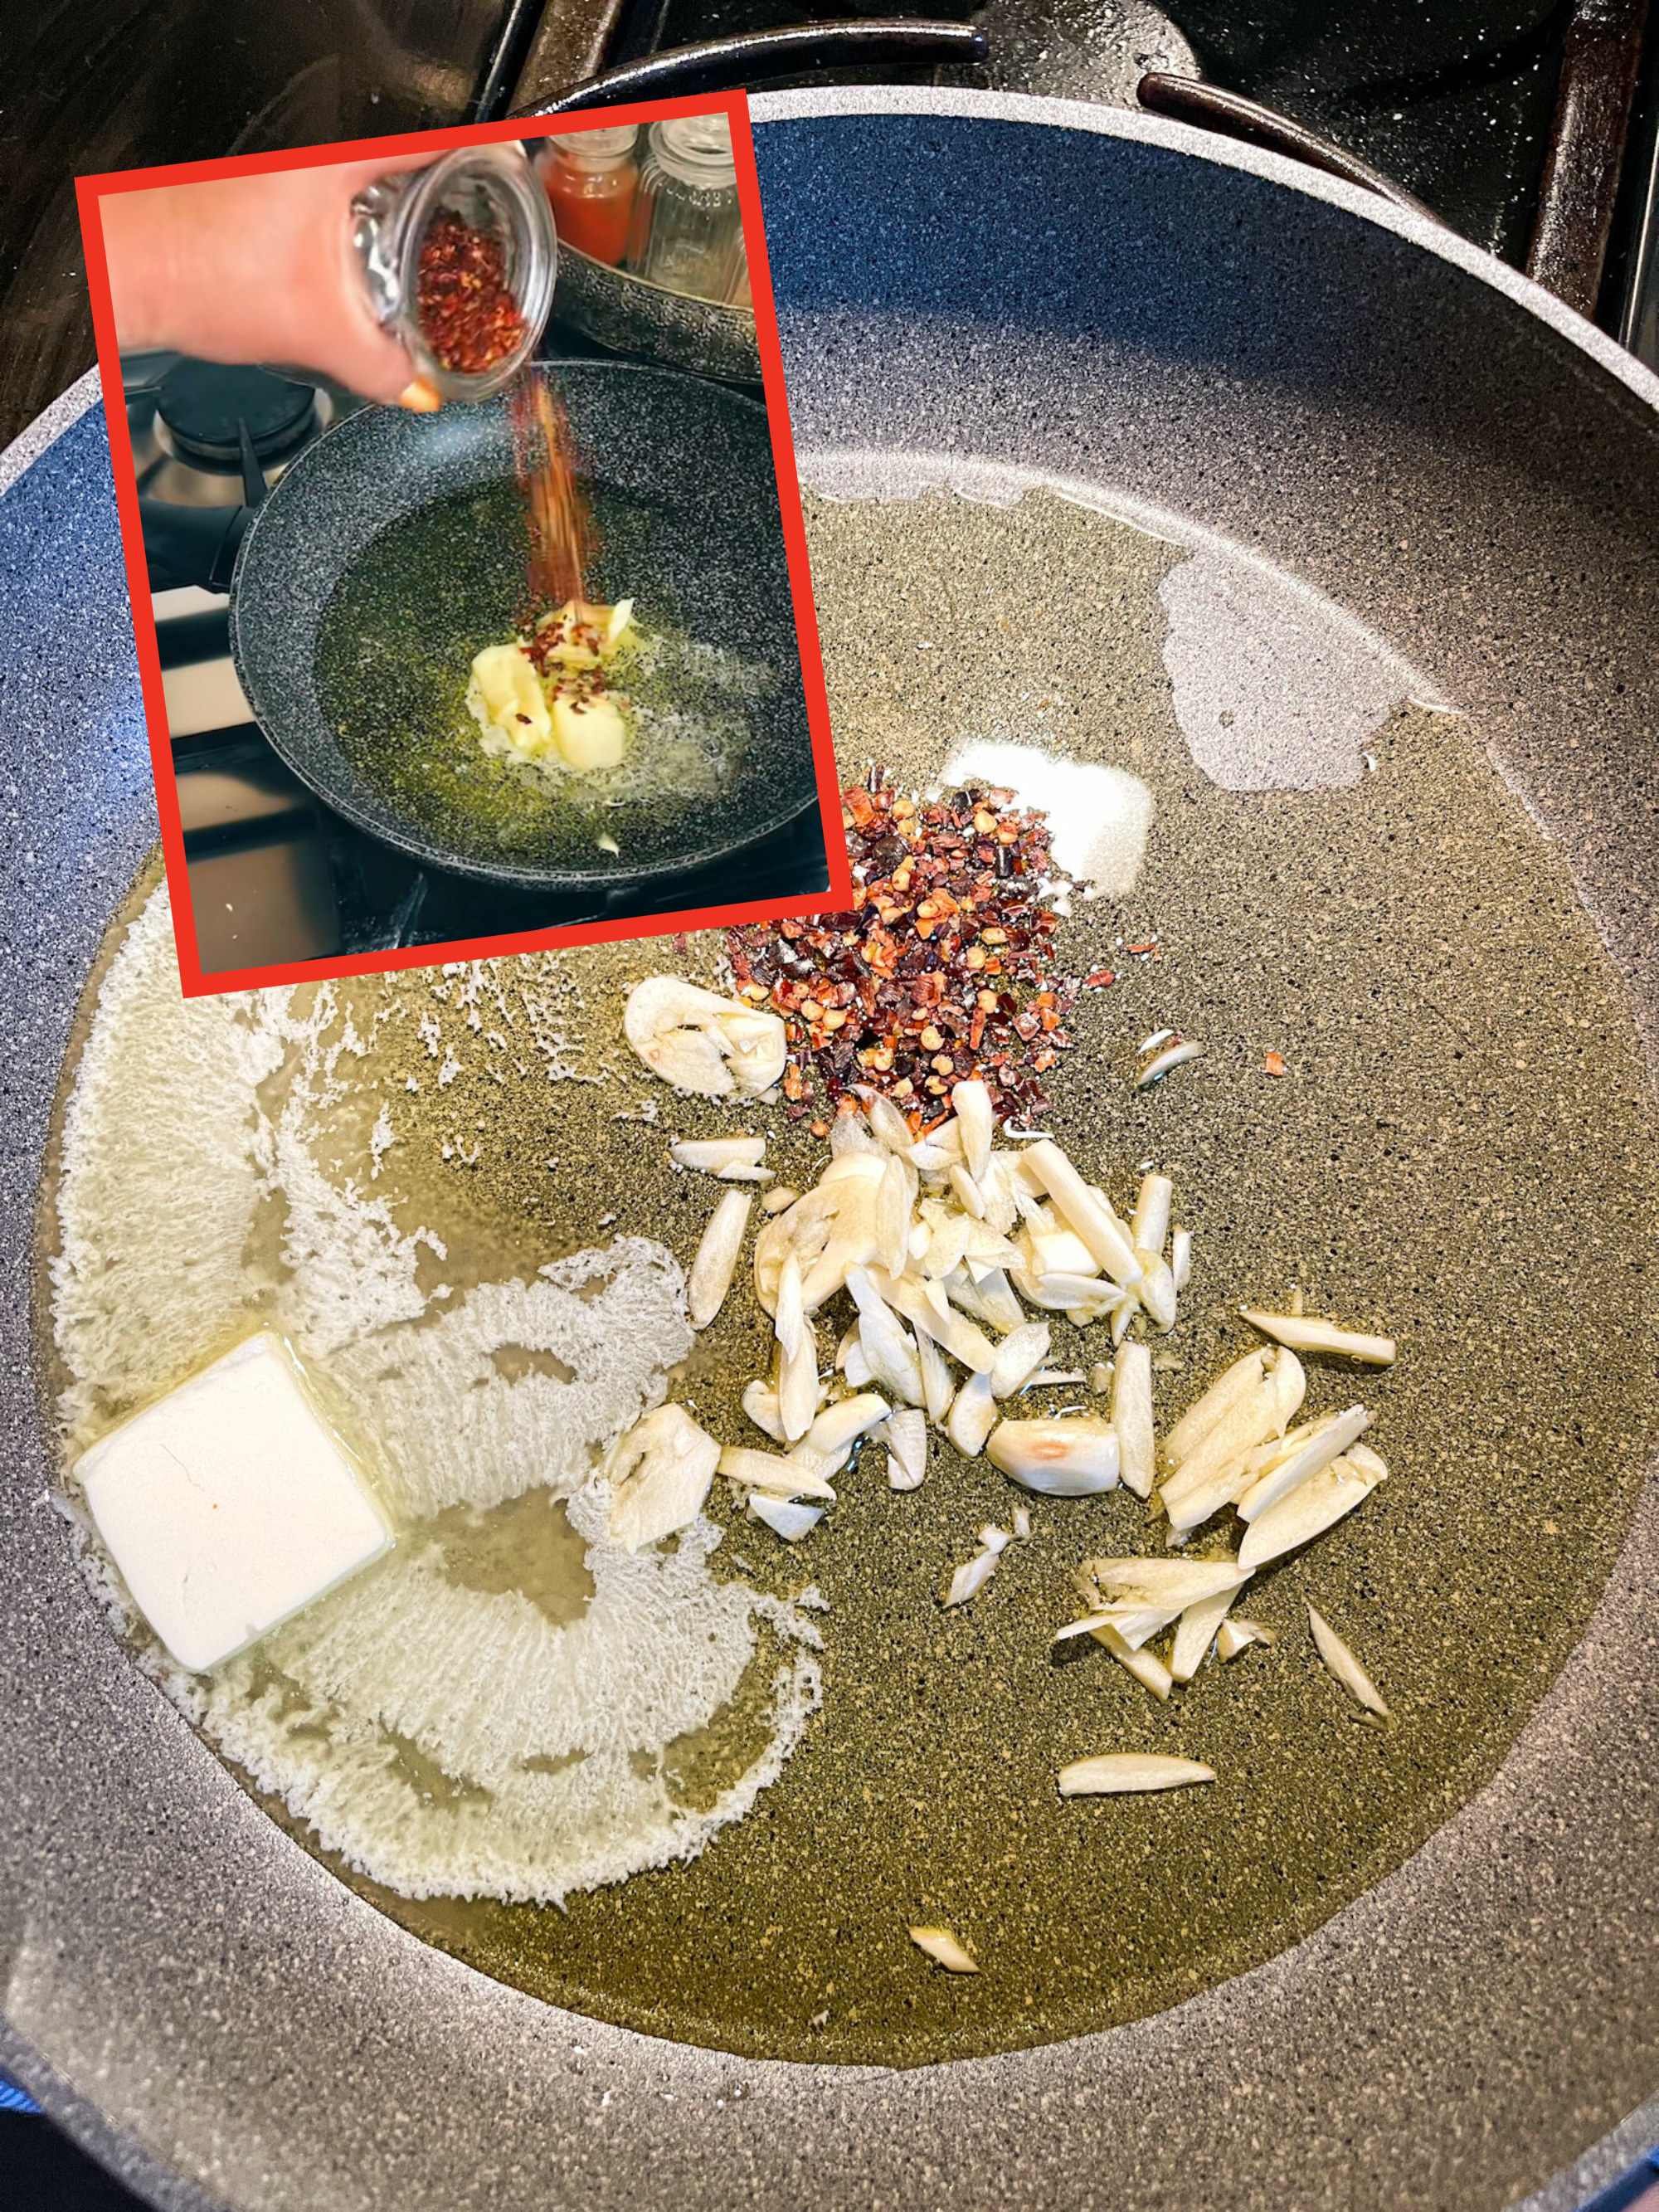 Ingredients being added to the pan